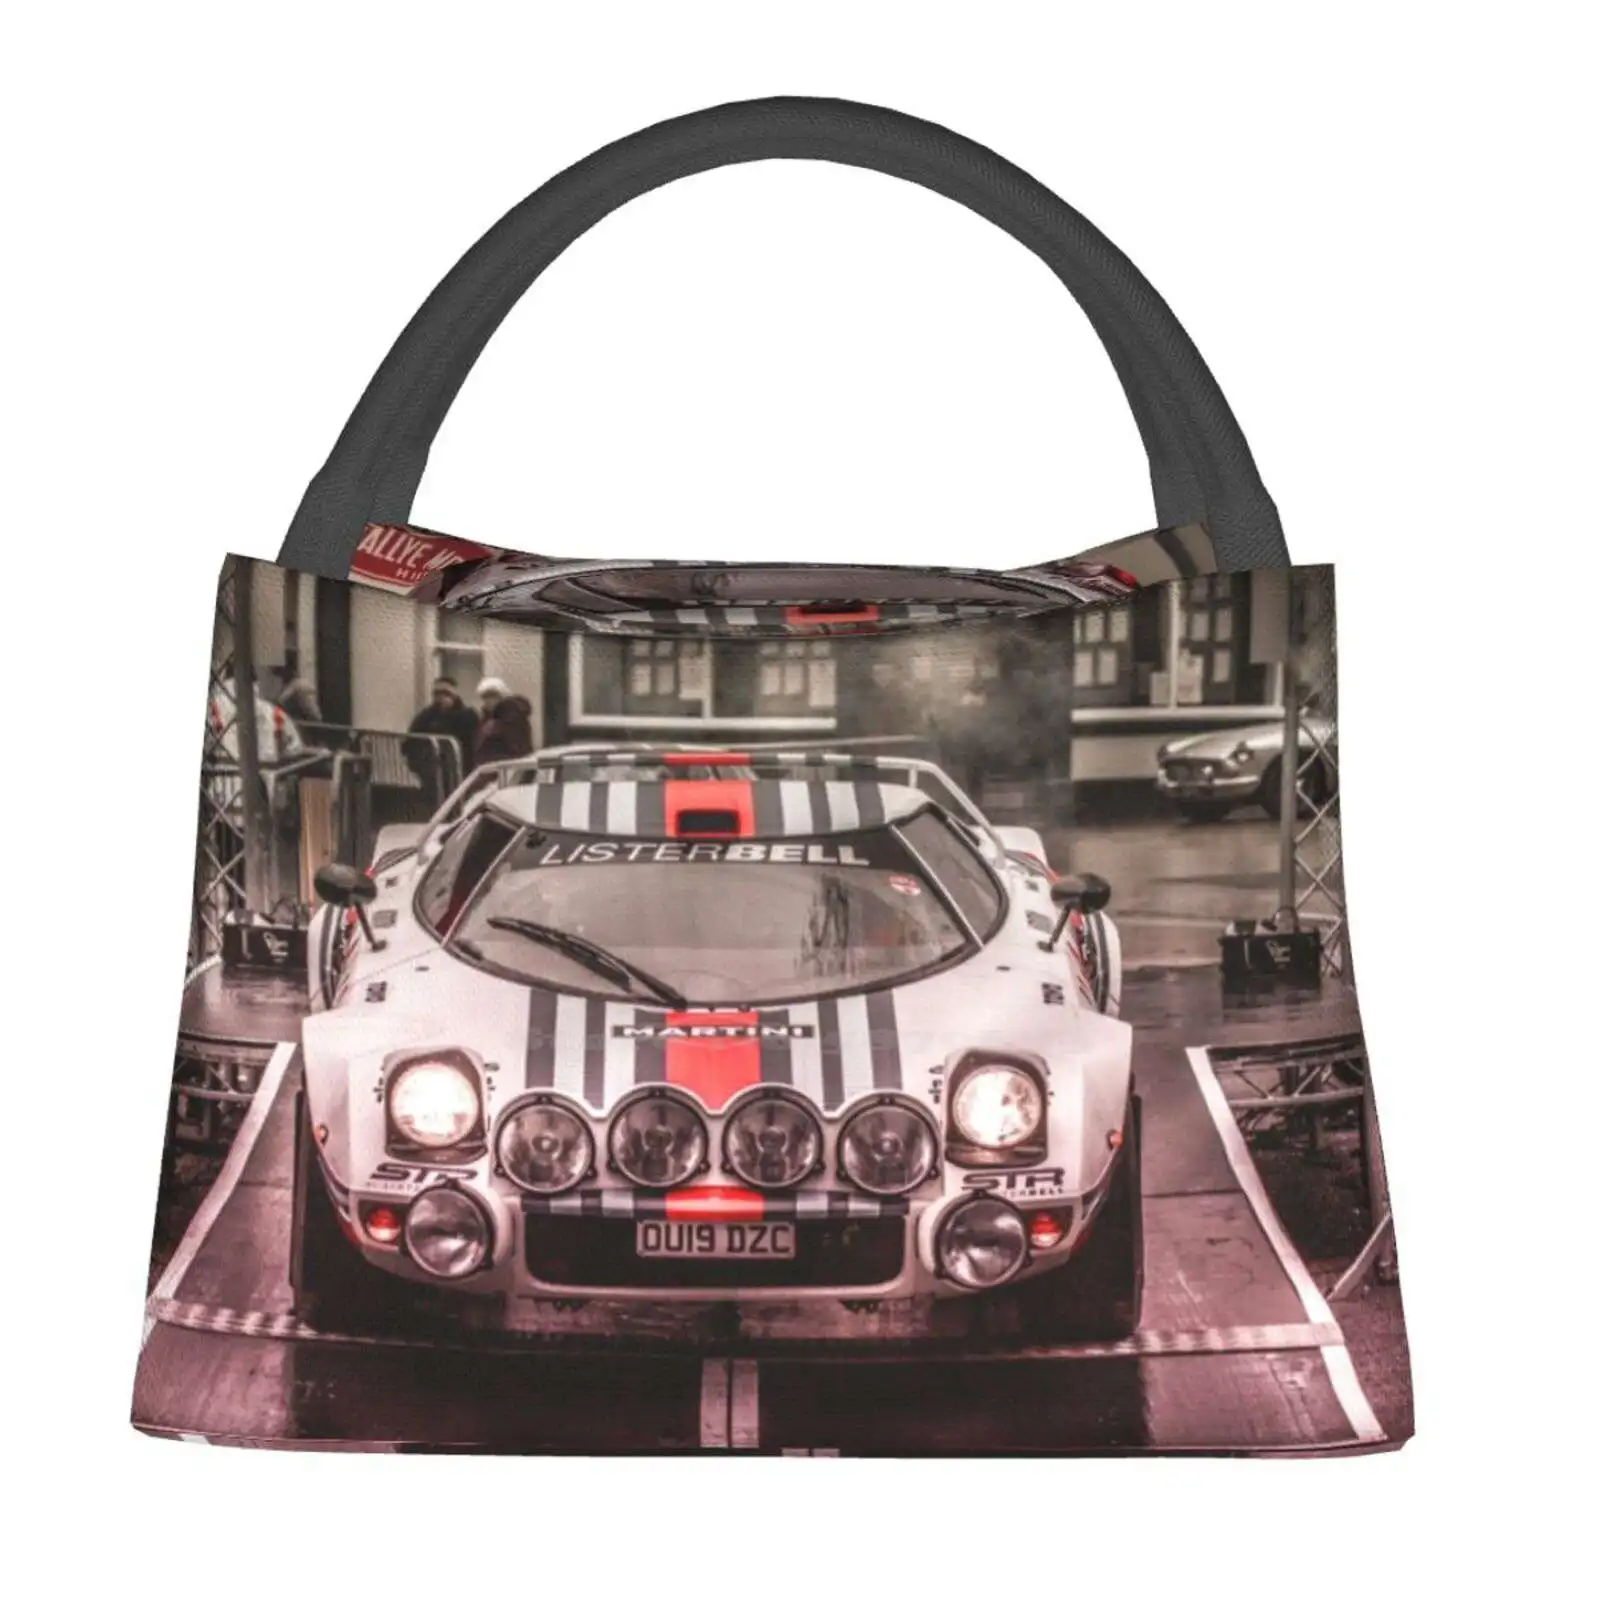 

Lancia Stratos Rally Car In Martini Racing Livery Insulated Thermal Cooler Bags Winter Summer Lancia Stratos Lister Bell I